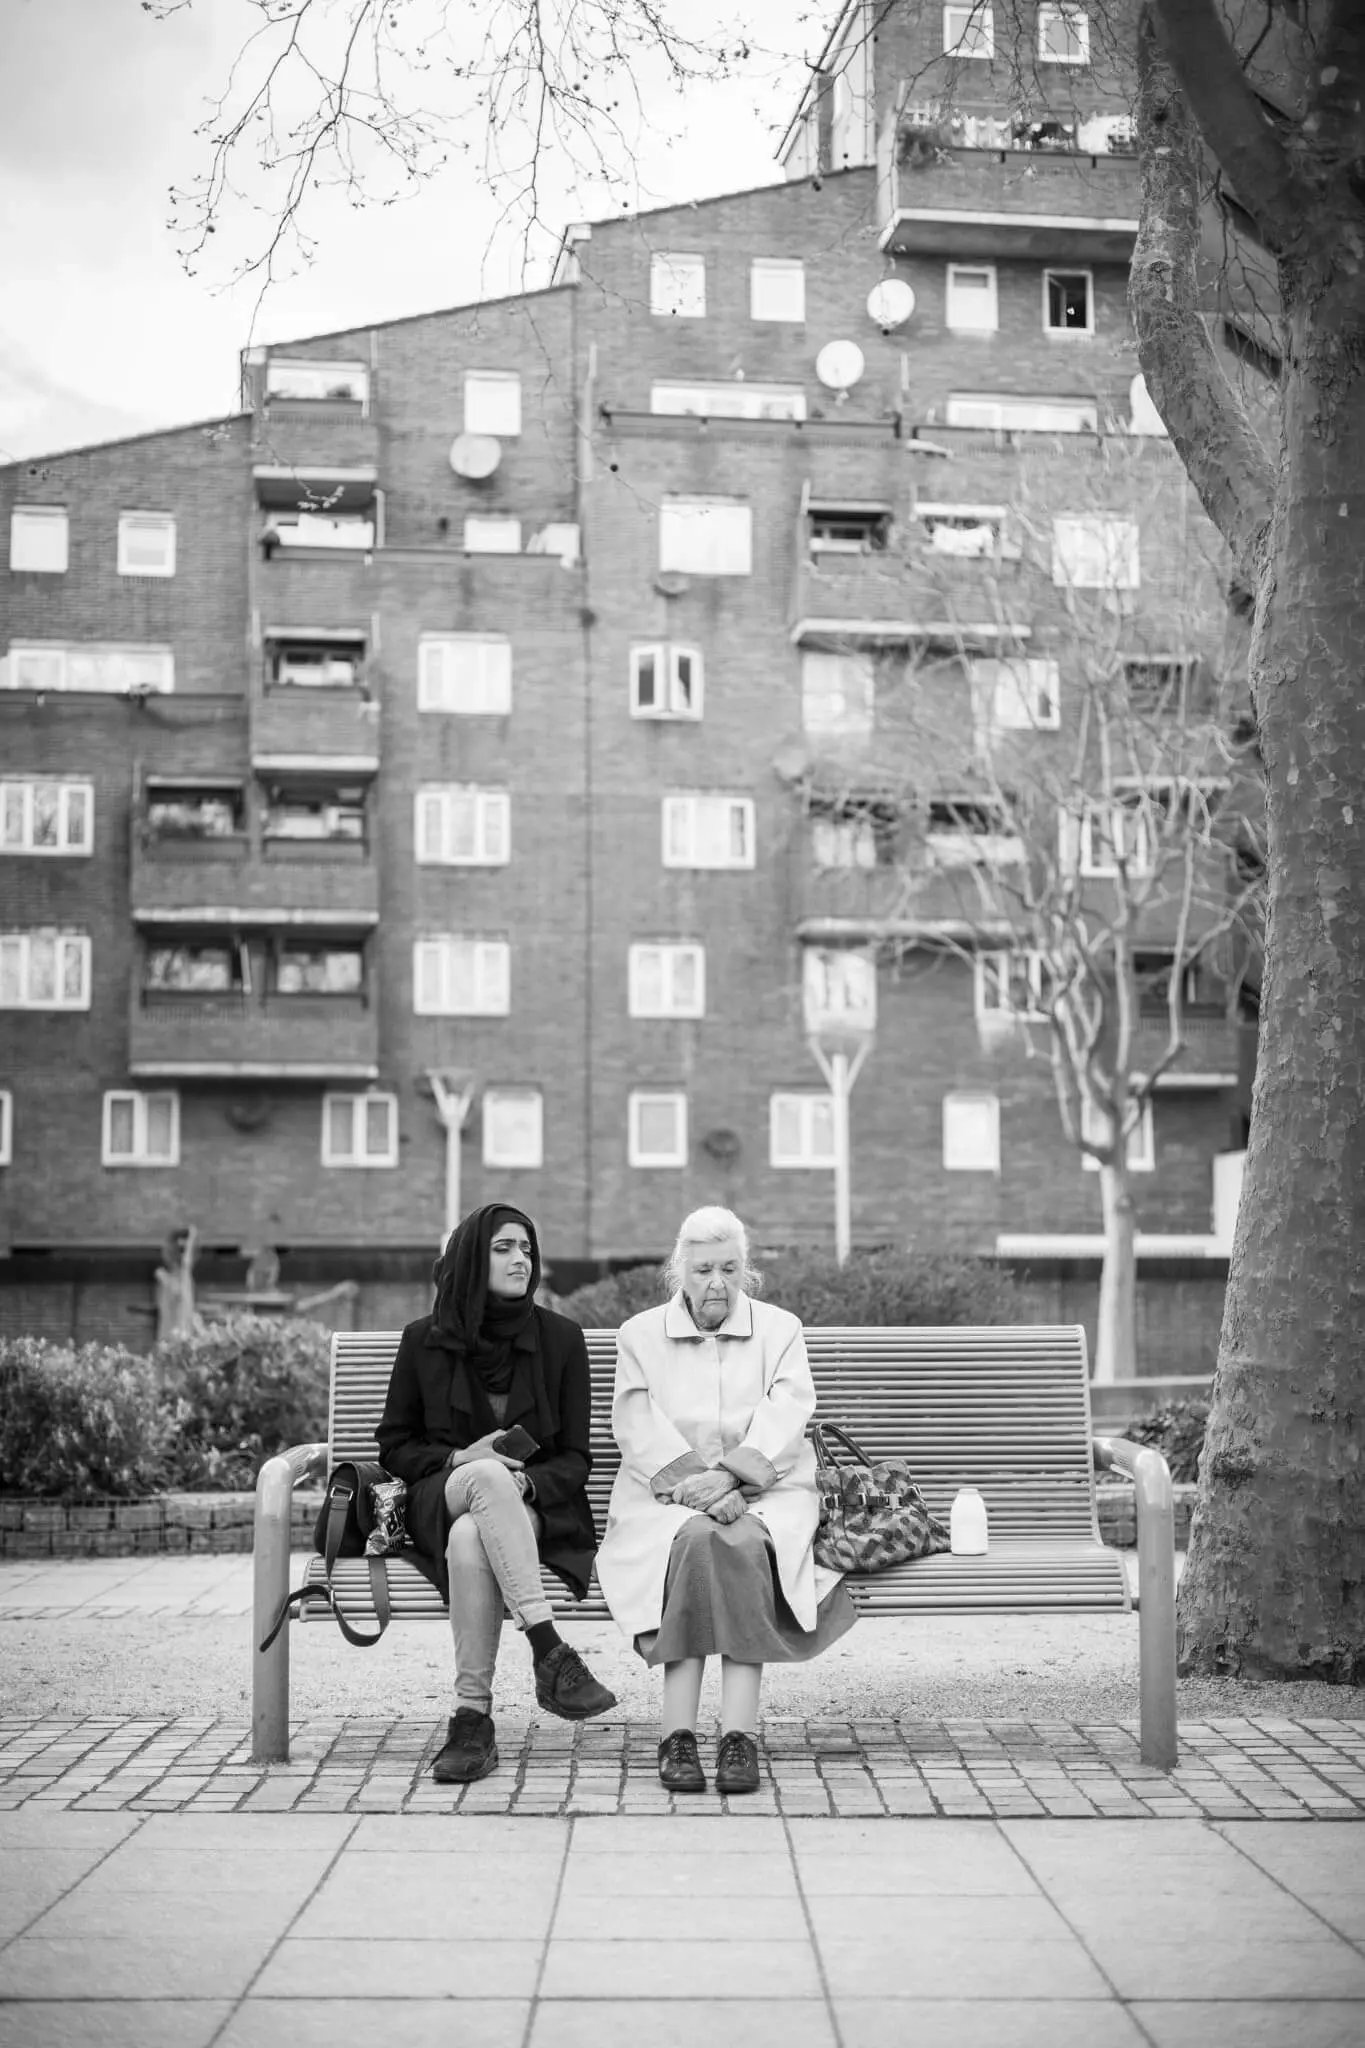 A poster image from the short film 'Mrs Taylor' directed by Martyn Thomas. The image depicts a lady and an elderly woman sitting on a bench in a residential area, captured in black and white.